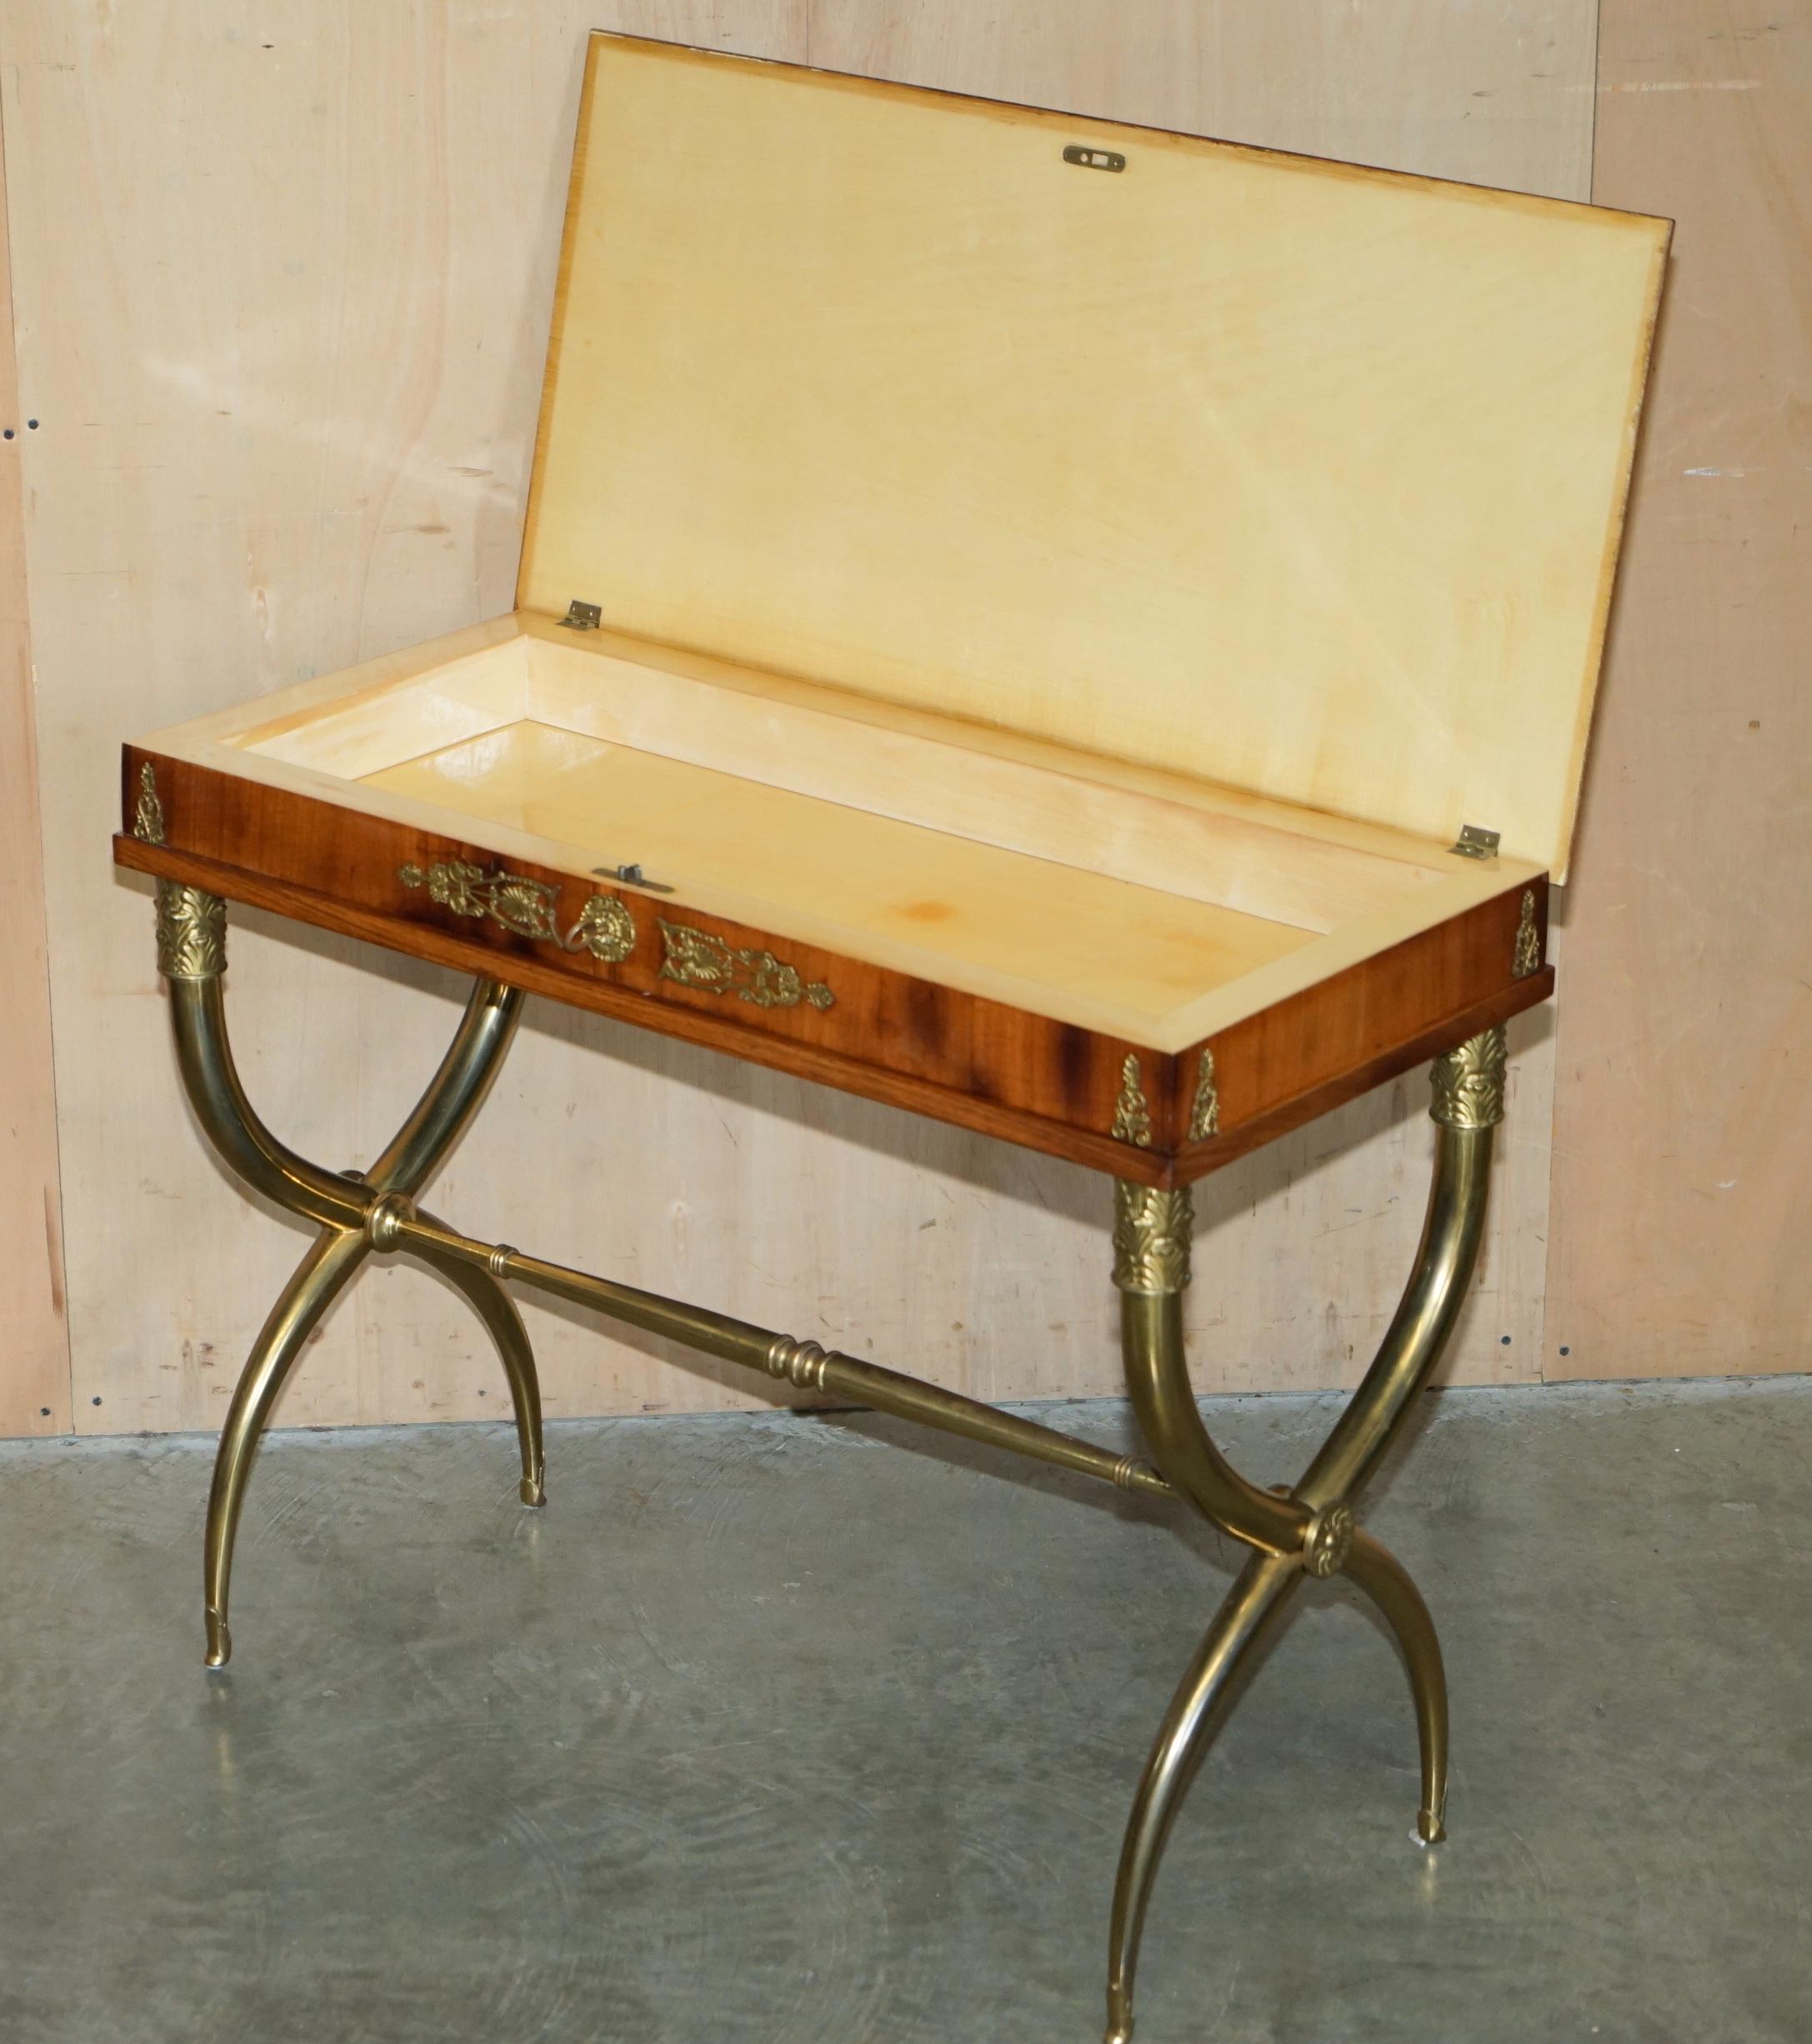 STUNNING REGENCY STYLE NEOCLASSICAL BRASS & WALNUT WRiTING TABLE DESK CIRCA 1920 For Sale 13